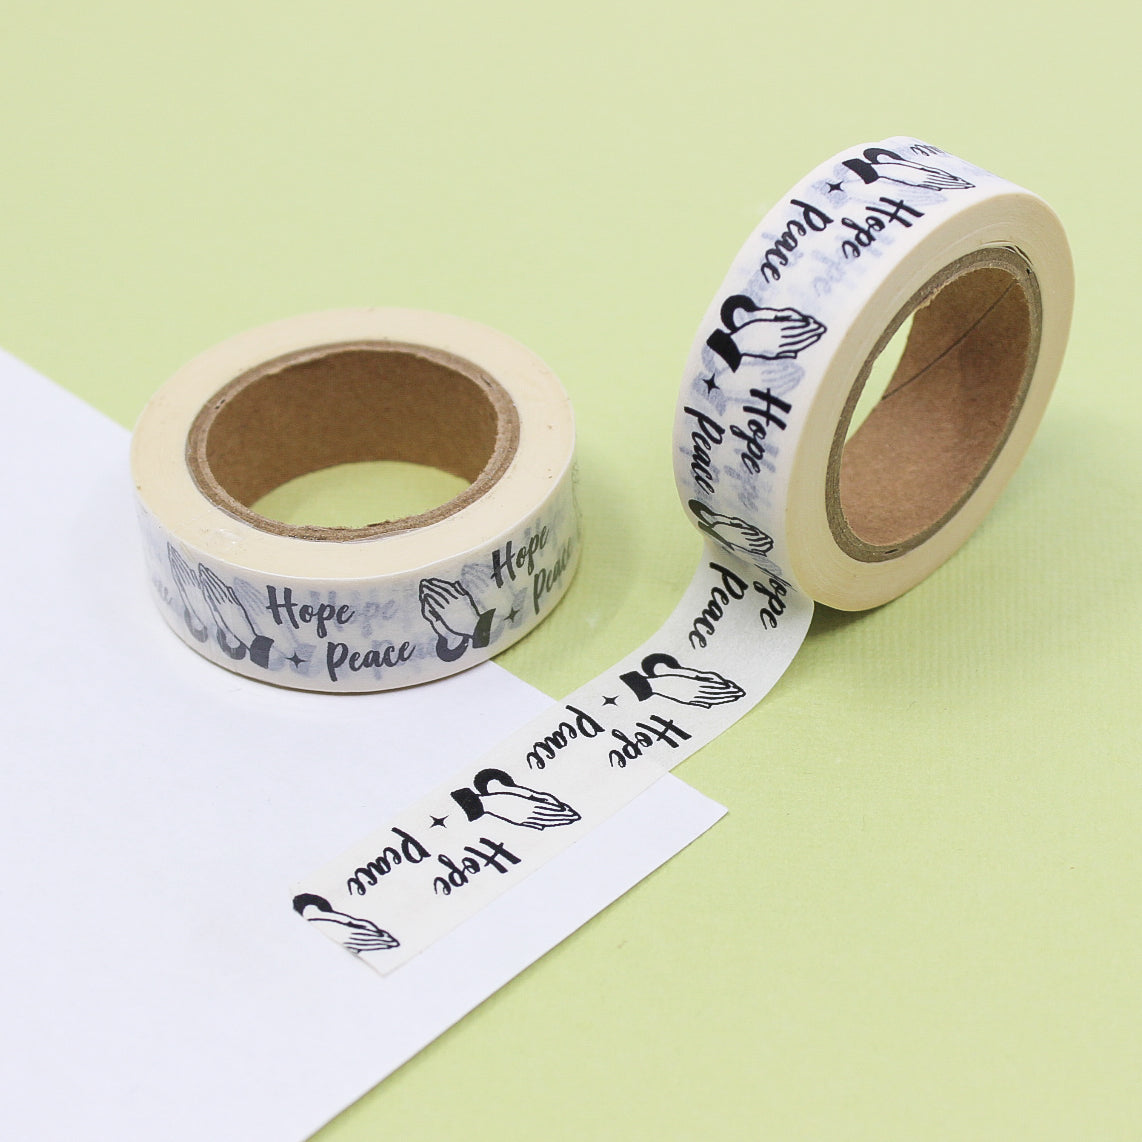 Embrace faith and spirituality with our Praying Hands Faith Washi Tape, adorned with serene praying hands motifs. Ideal for adding a touch of reverence and inspiration to your crafts. This tape is sold at BBB Supplies Craft Shop.